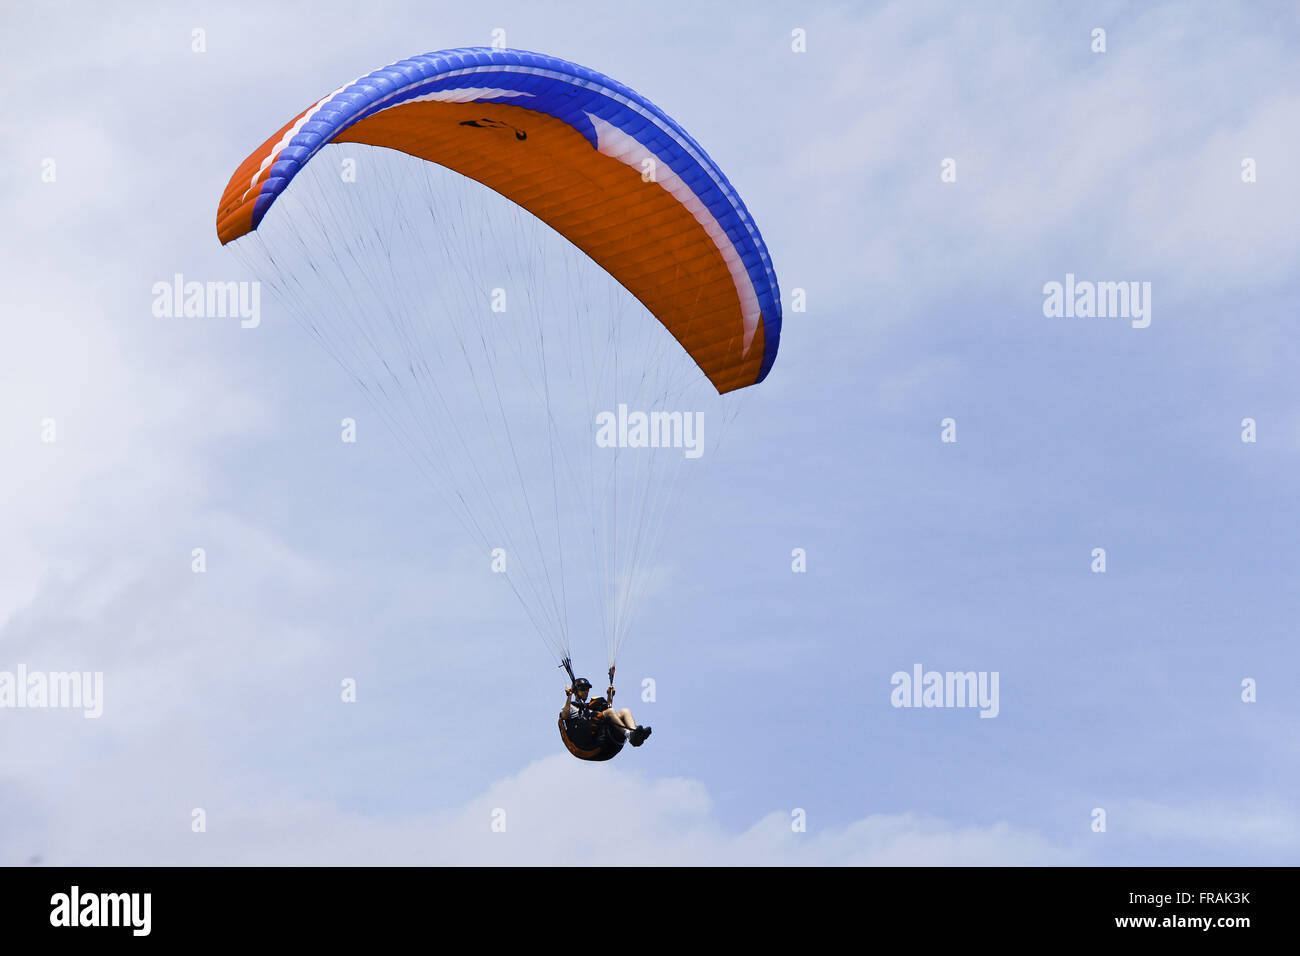 Paragliding in competion free flight Stock Photo